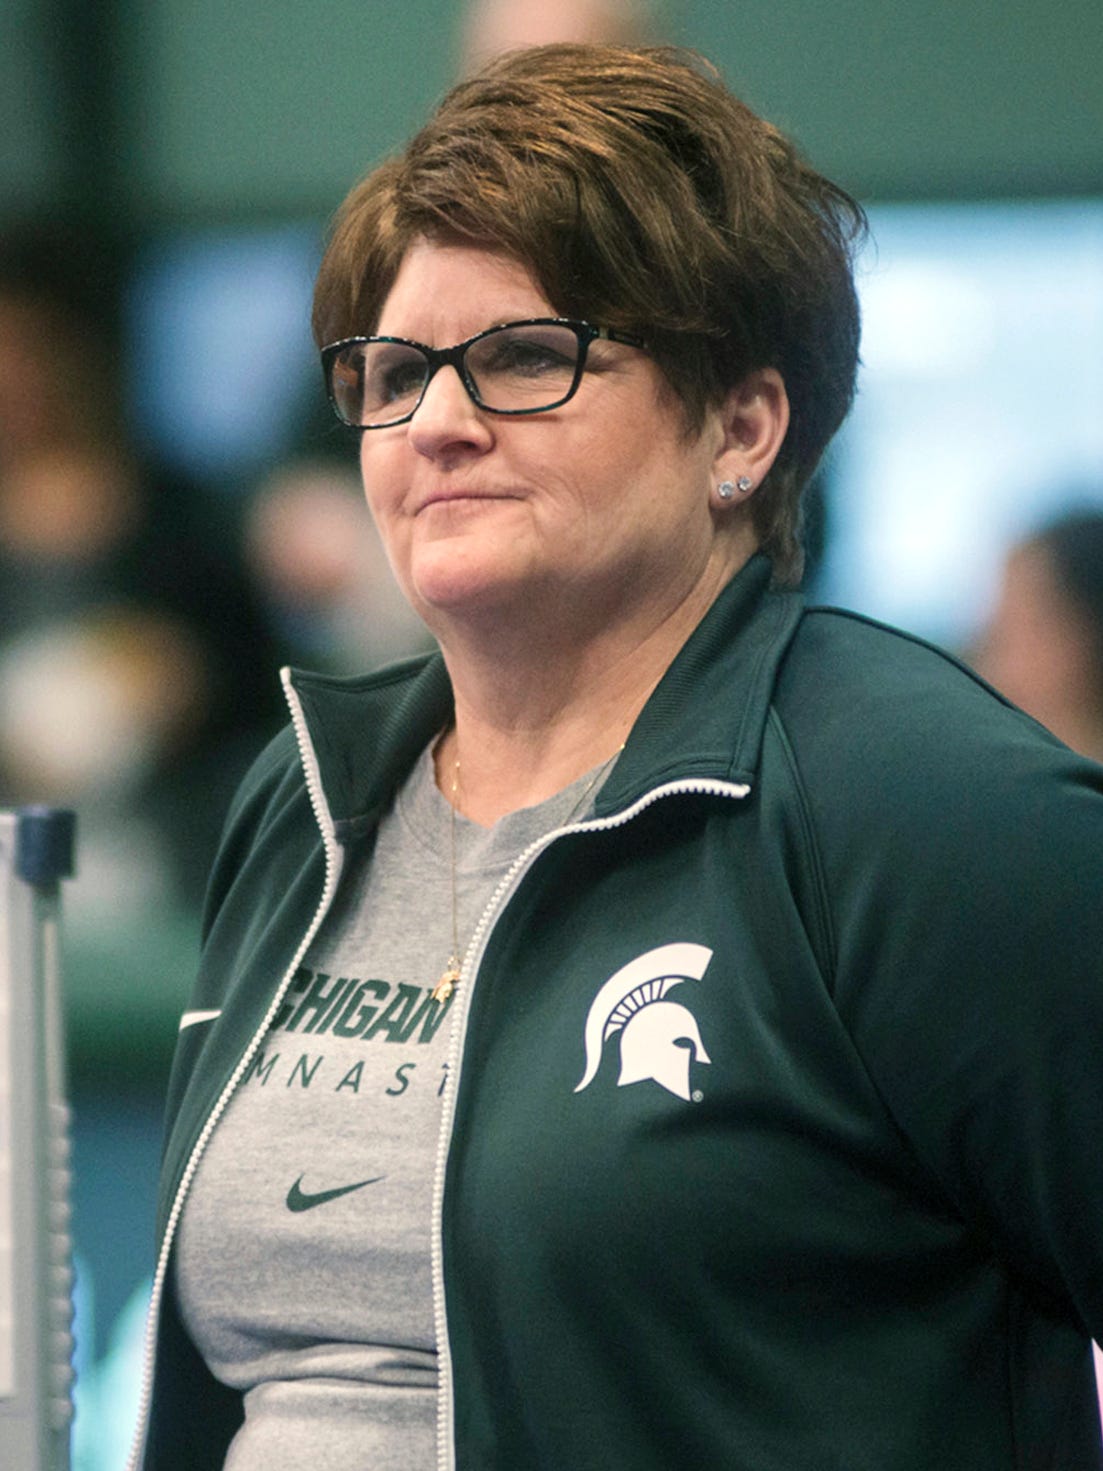 1997: Larissa Boyce told a coach about Nassar, who insisted that Boyce tell MSU's head gymnastics coach, Kathie Klages, above. "(Klages) just couldn't believe that was happening," said Boyce. "She said I must be misunderstanding what was going on."